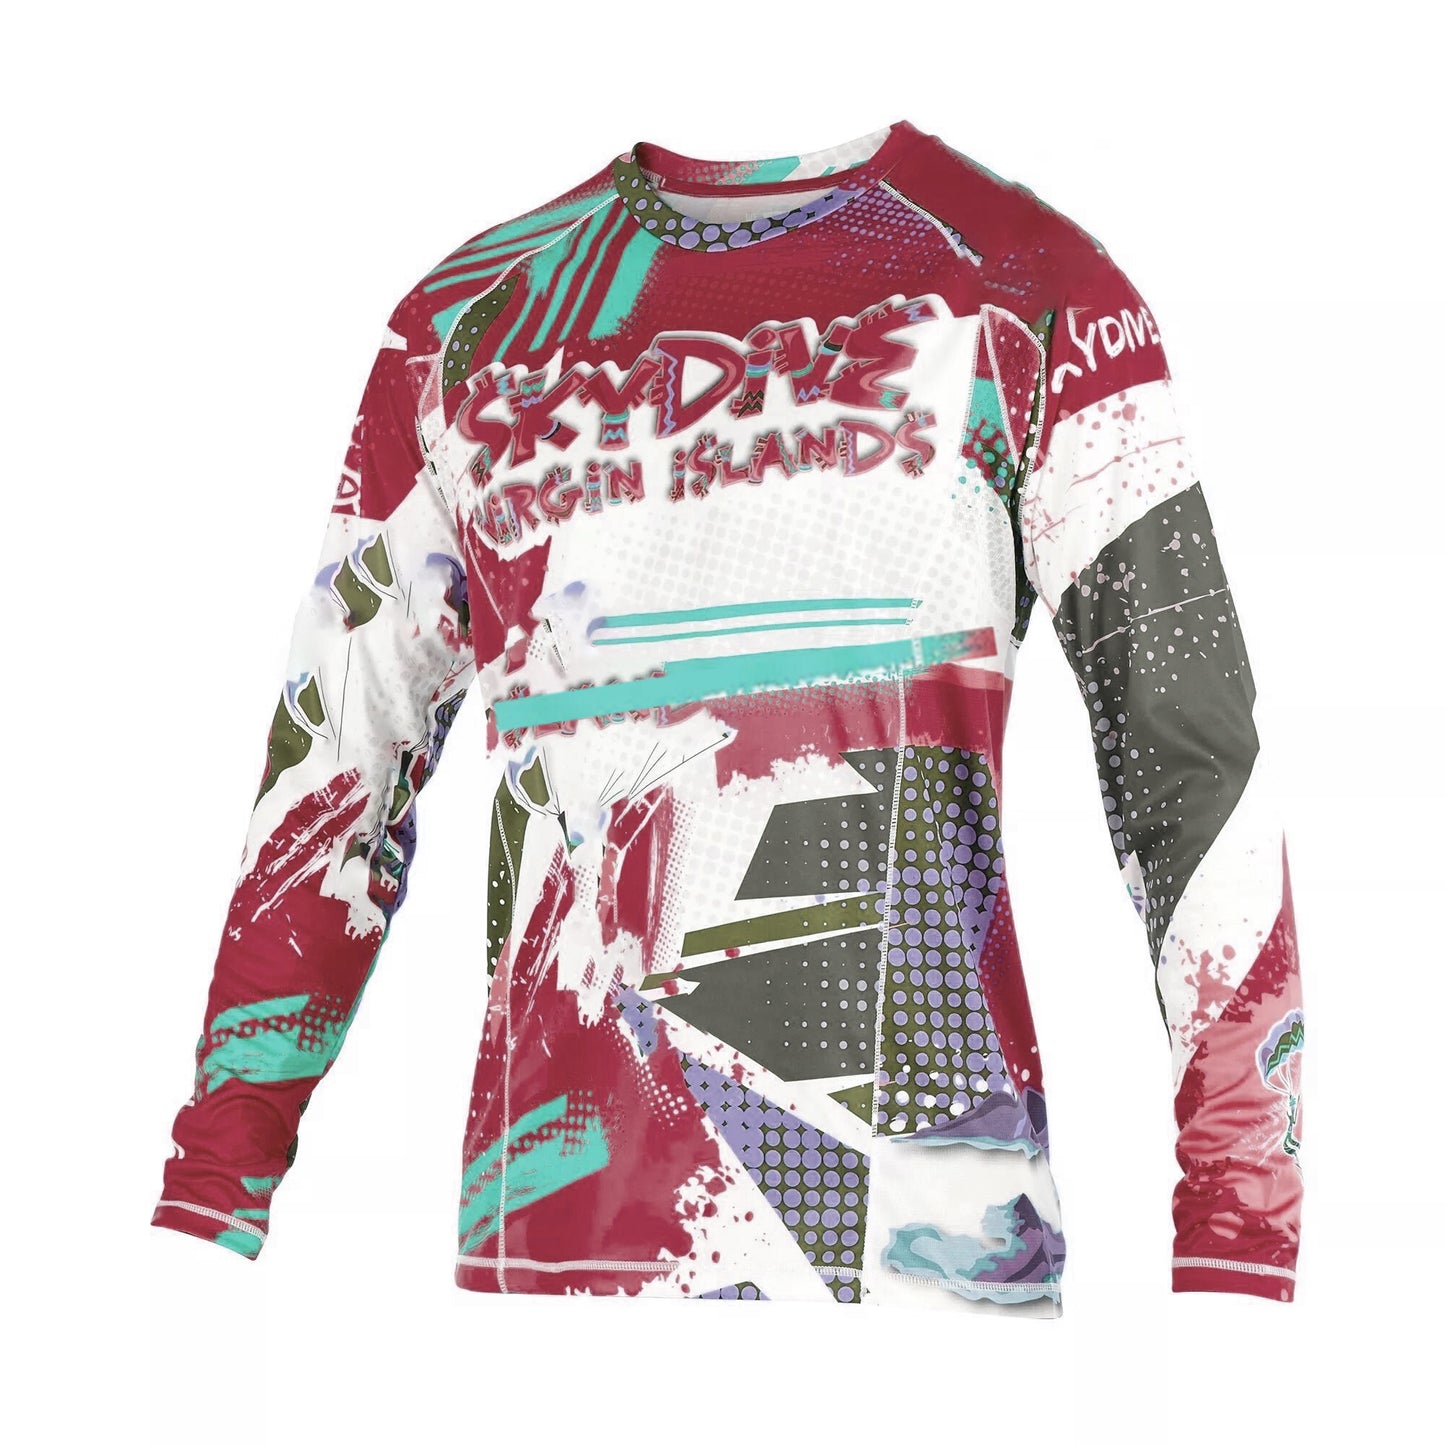 Skydiving sublimation printed jersey-020